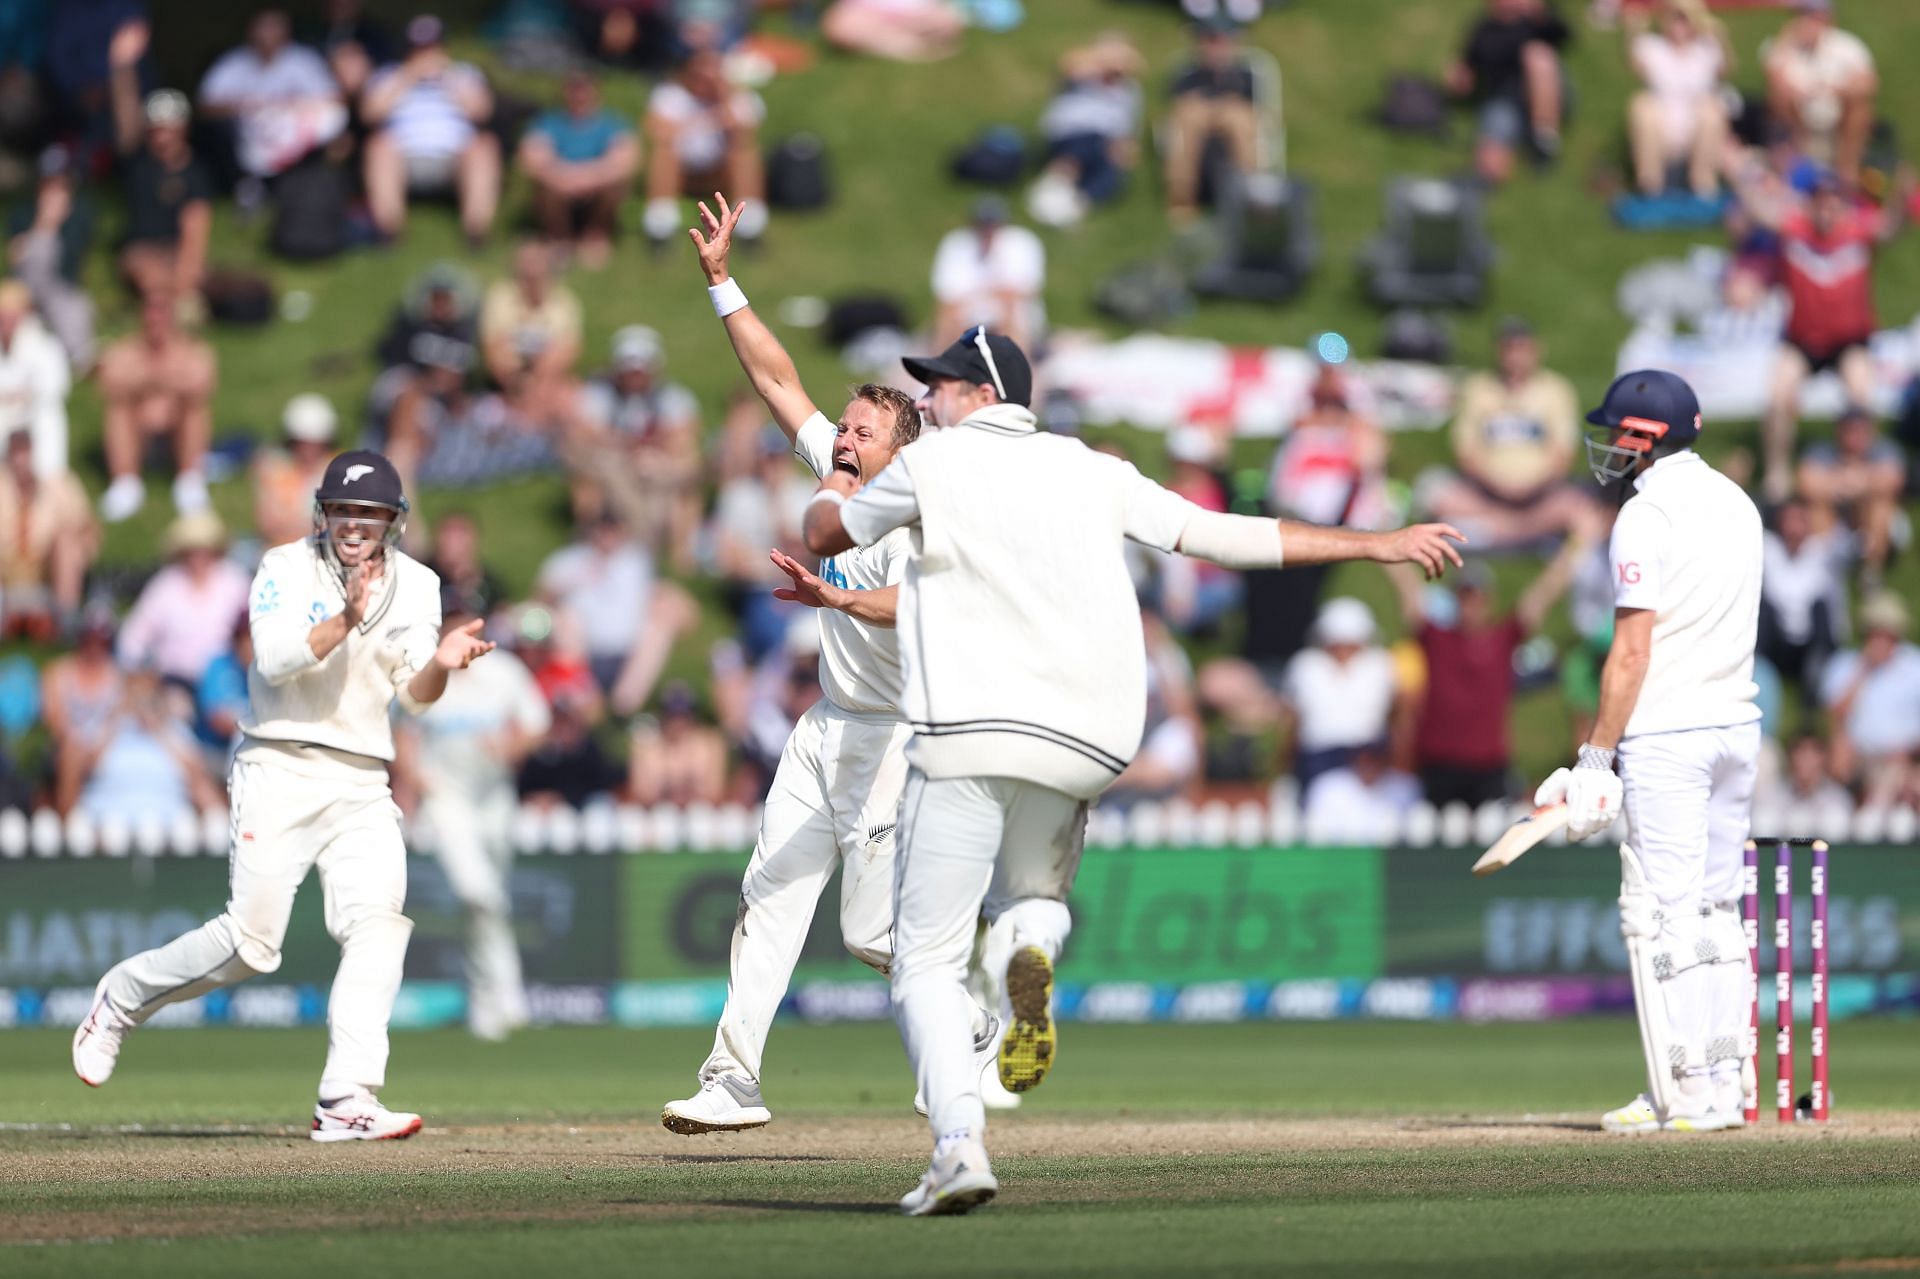 Neil Wagner took four wickets. (Credits: Getty)